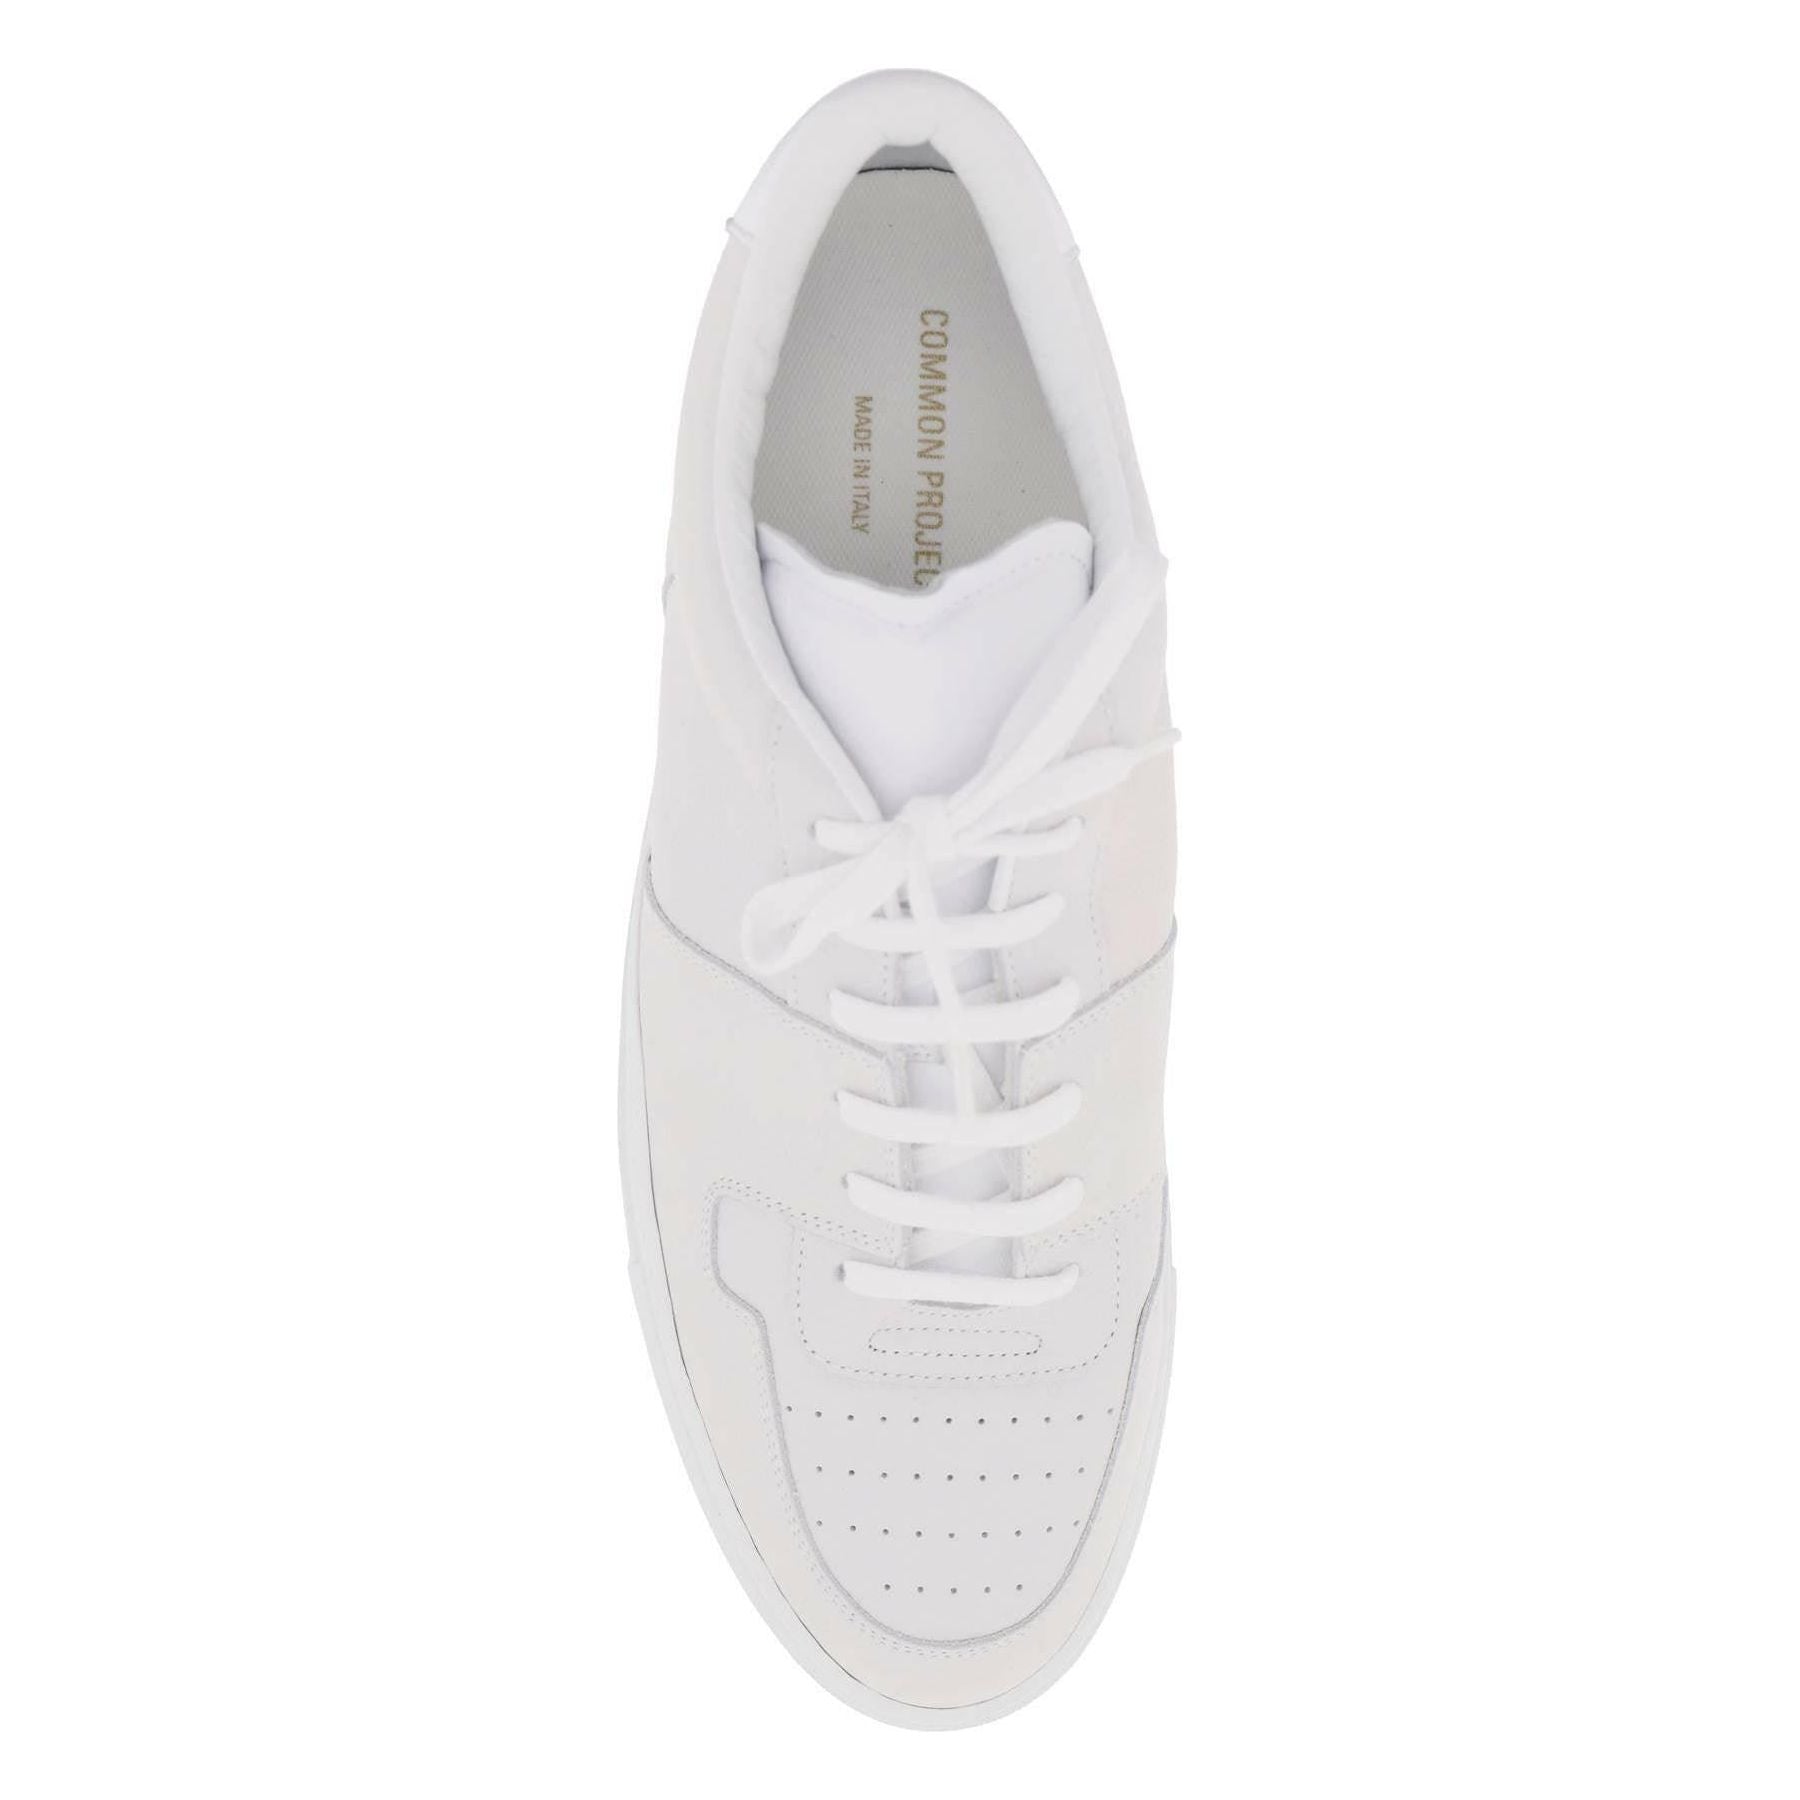 White Decades Low Leather Sneakers COMMON PROJECTS JOHN JULIA.